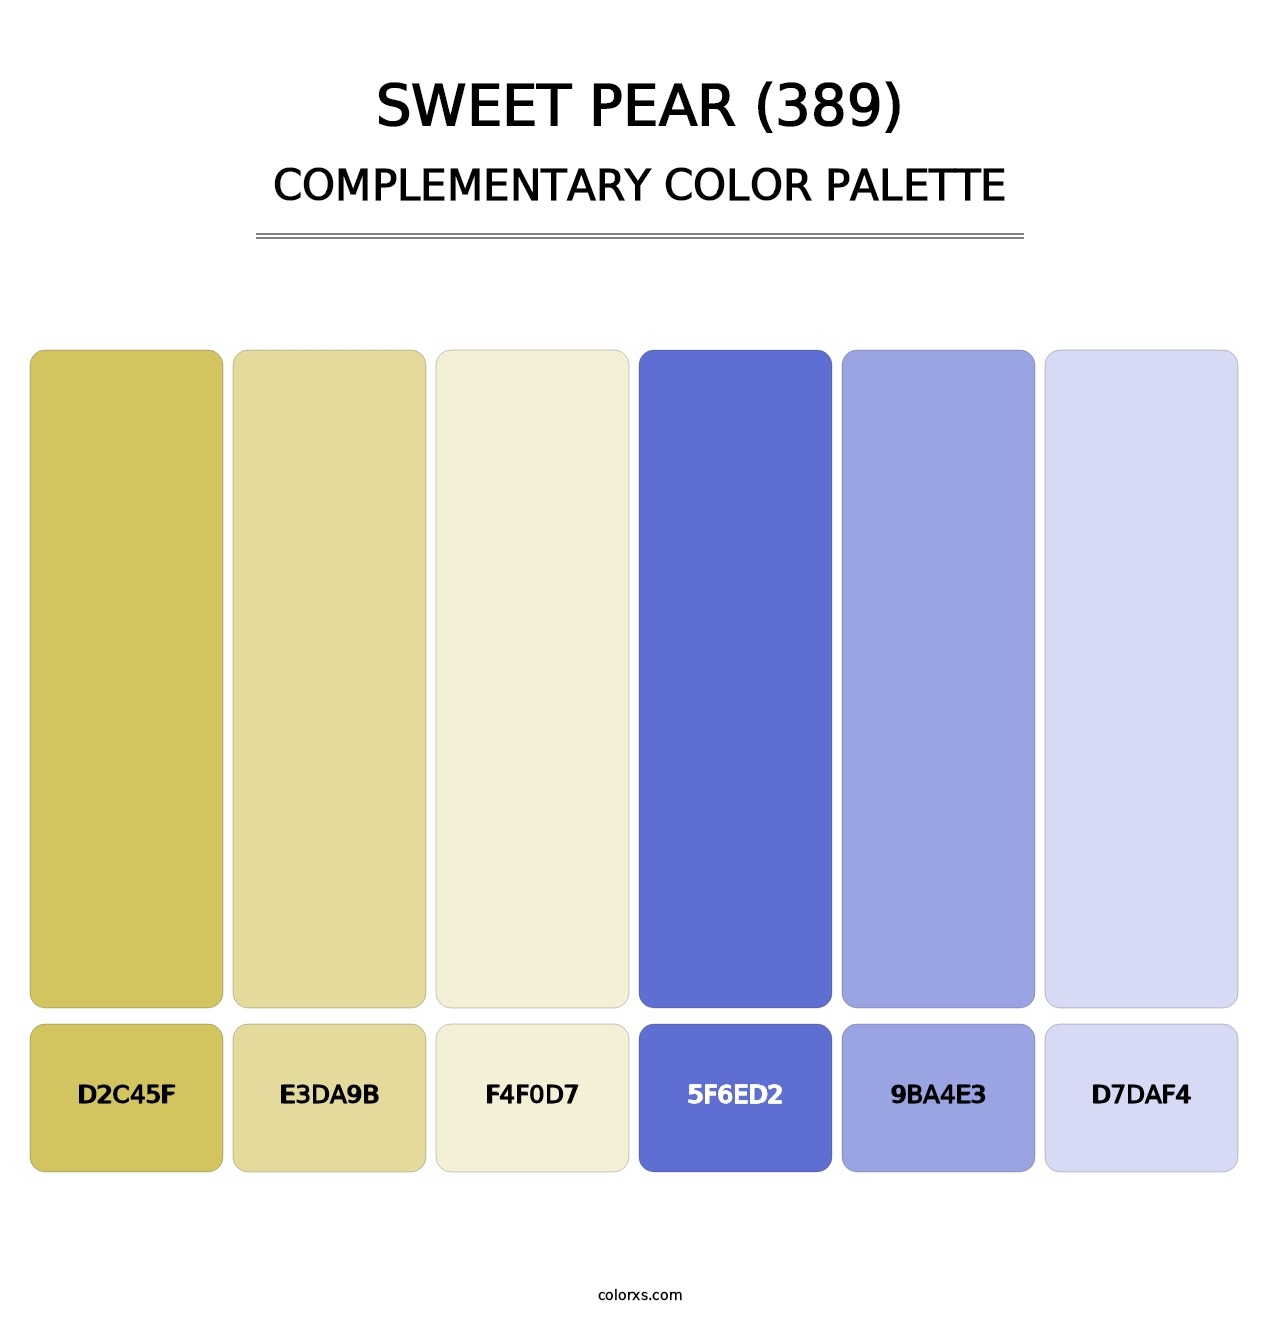 Sweet Pear (389) - Complementary Color Palette